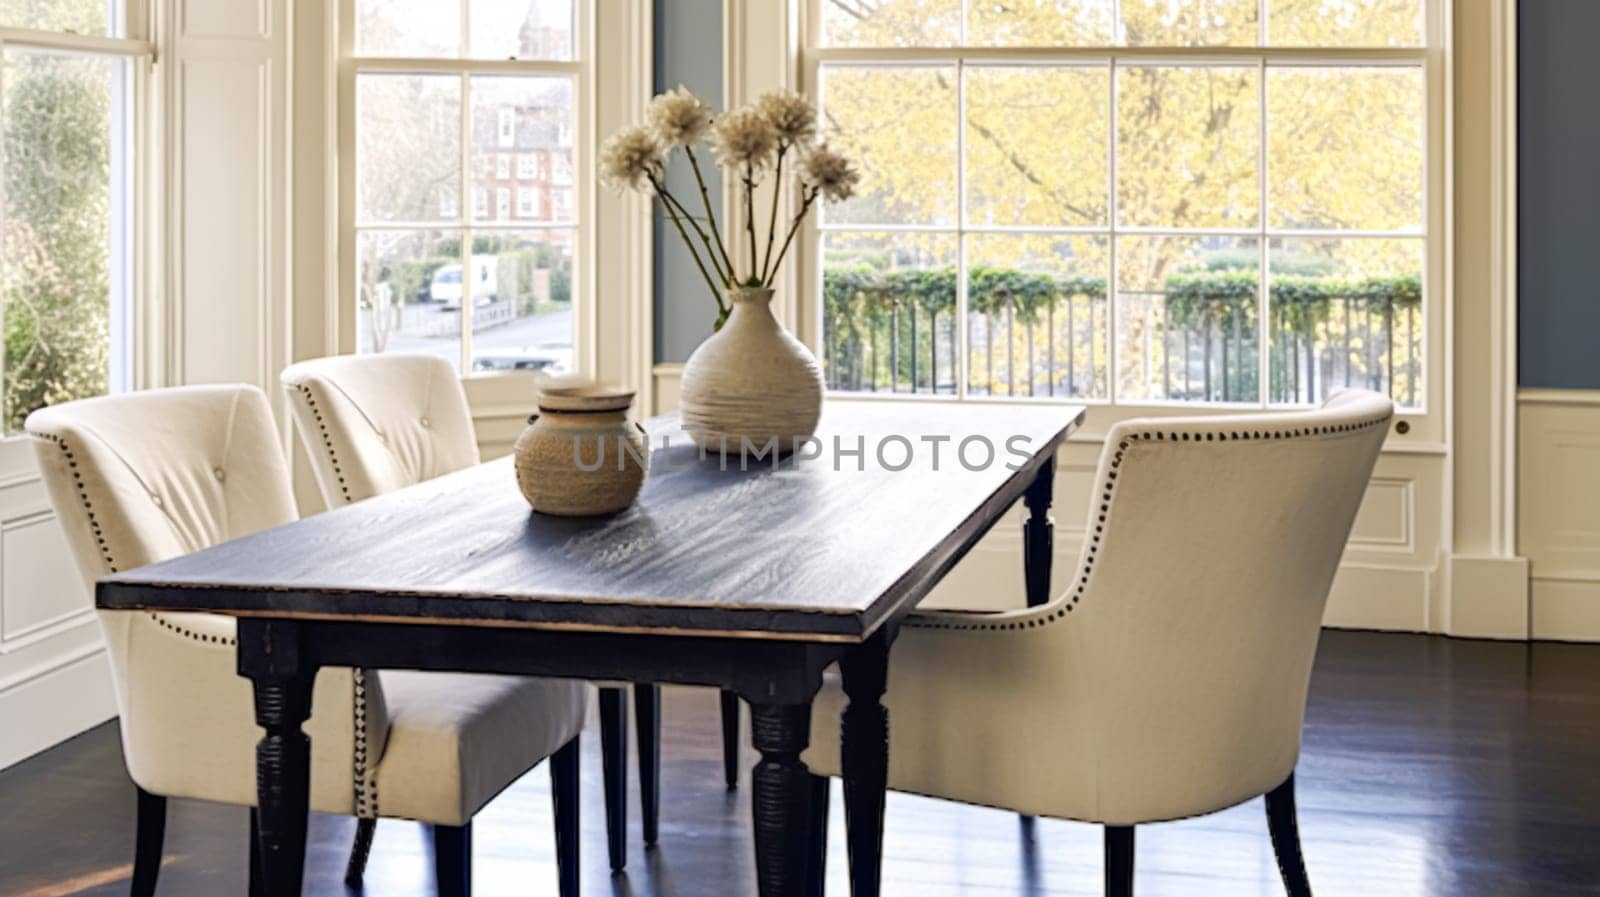 Modern cottage dining room decor, interior design and country house furniture, home decor, black table and white chairs, English countryside style interiors